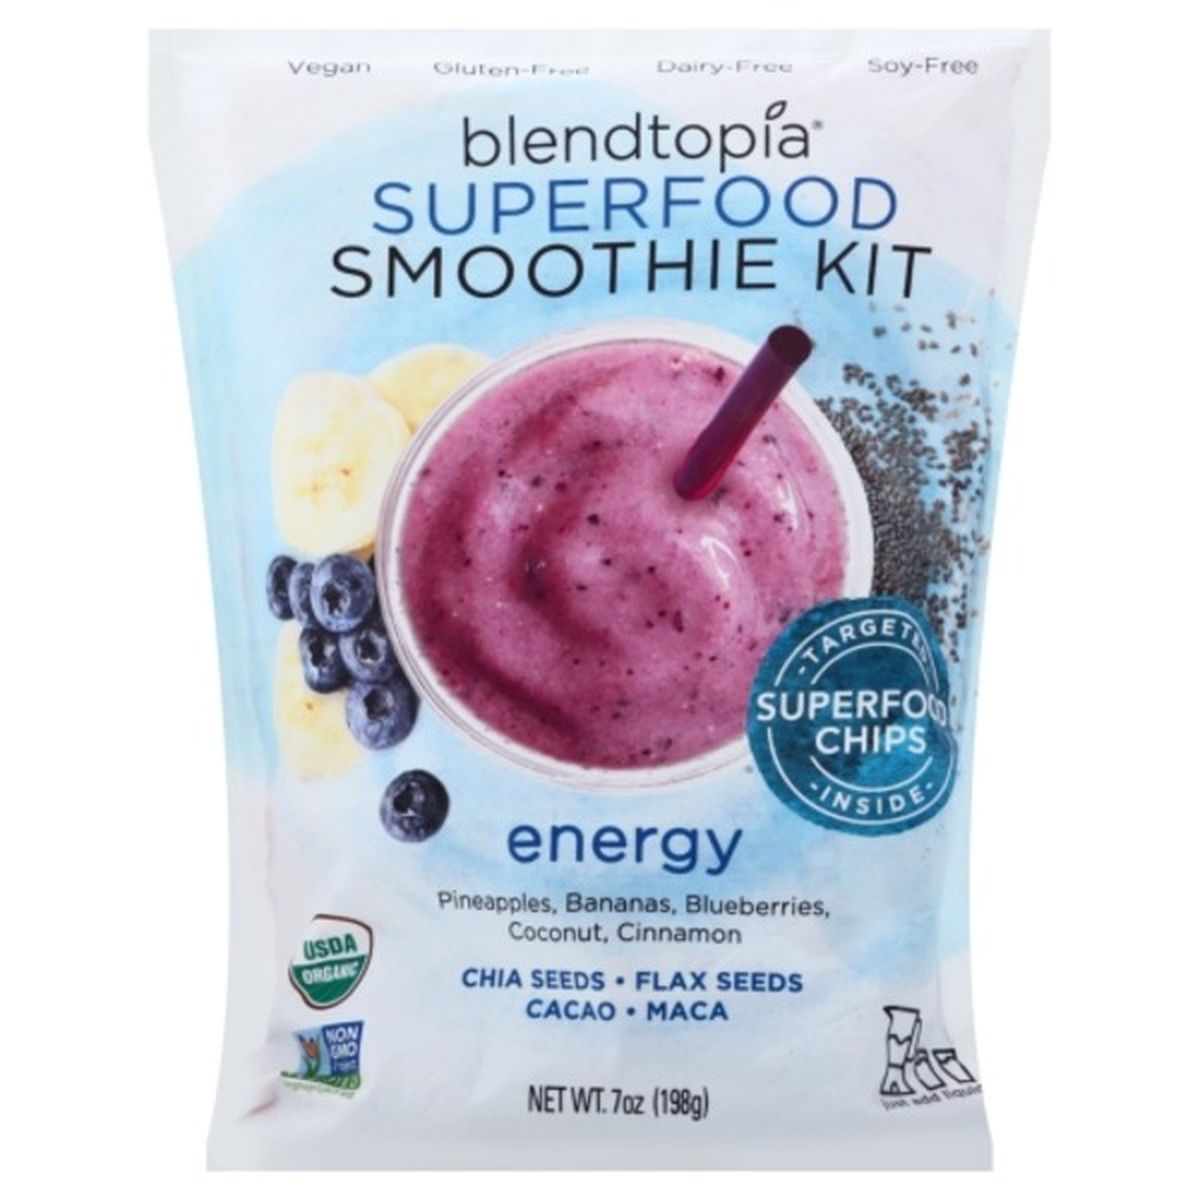 Calories in Blendtopia Smoothie Kit, Superfood, Energy